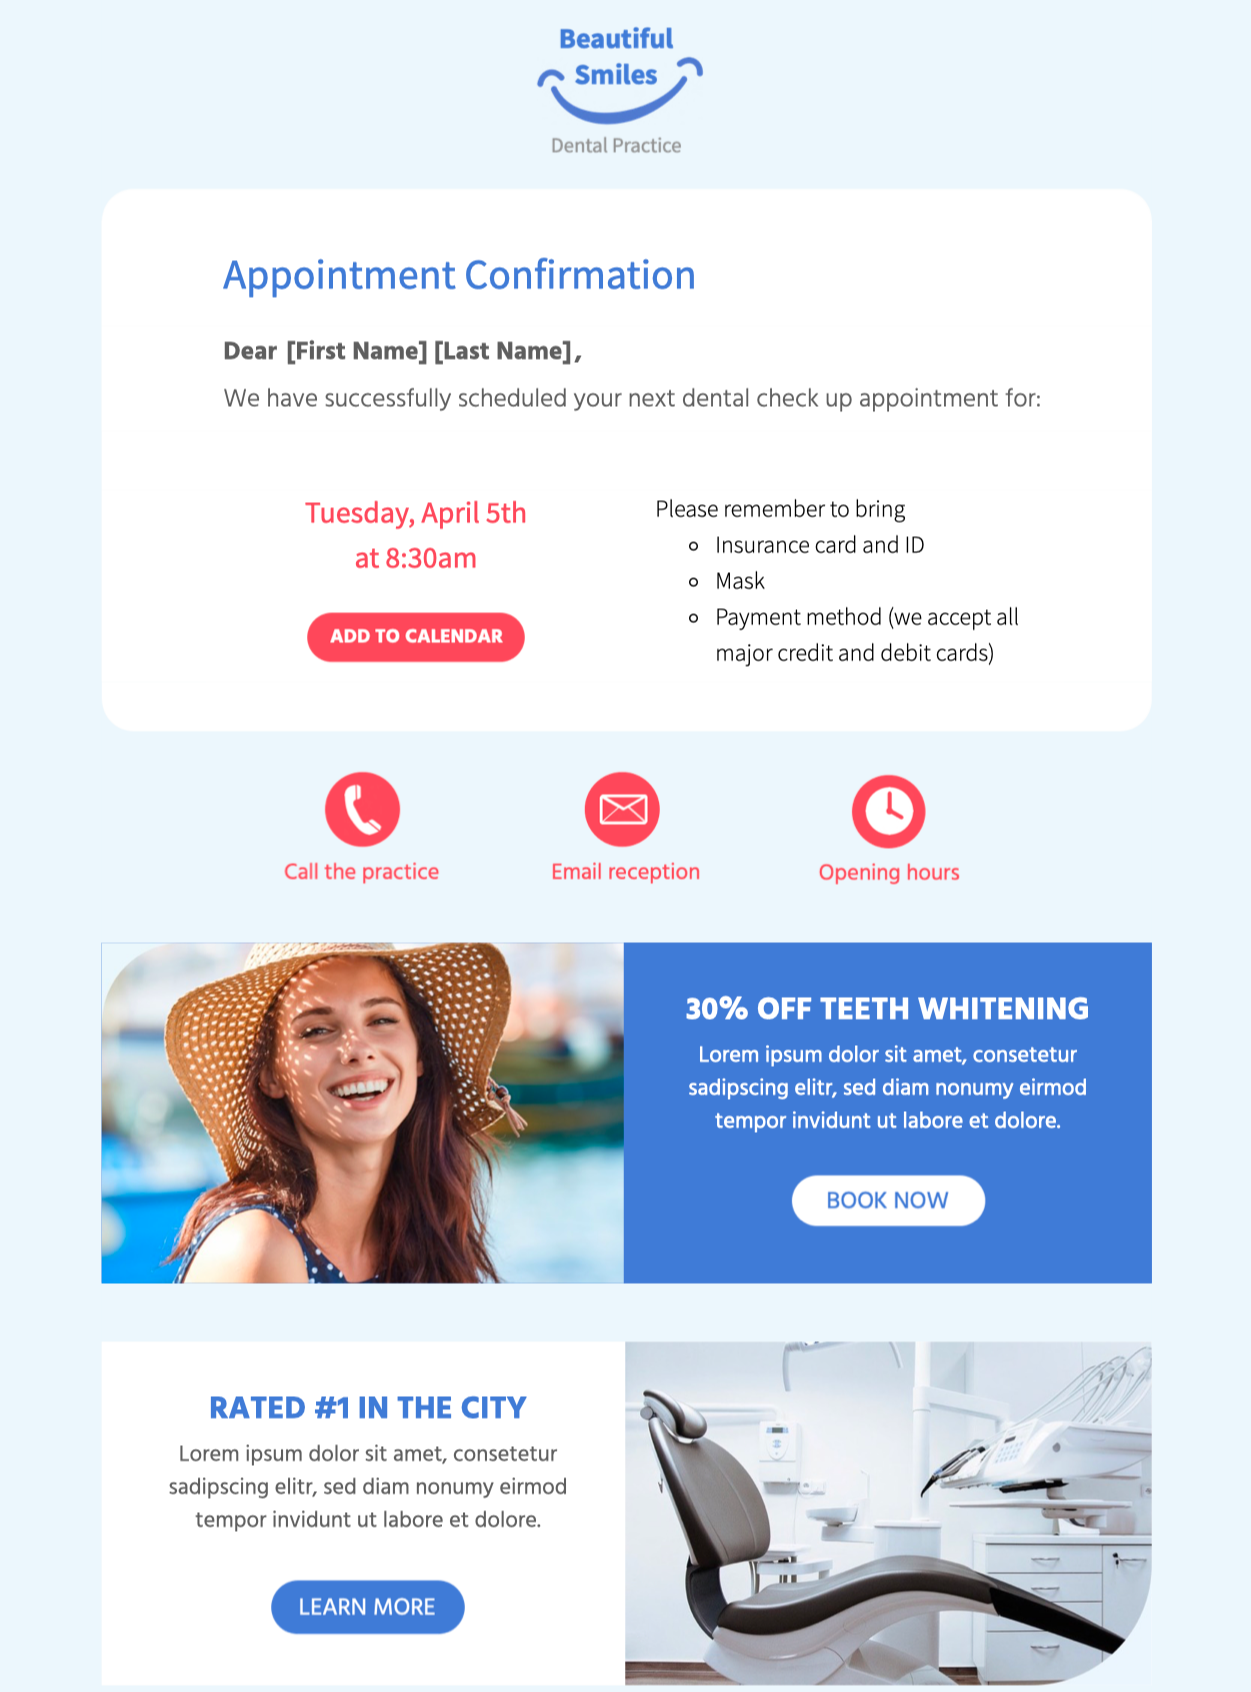 html email template for appointment confirmation